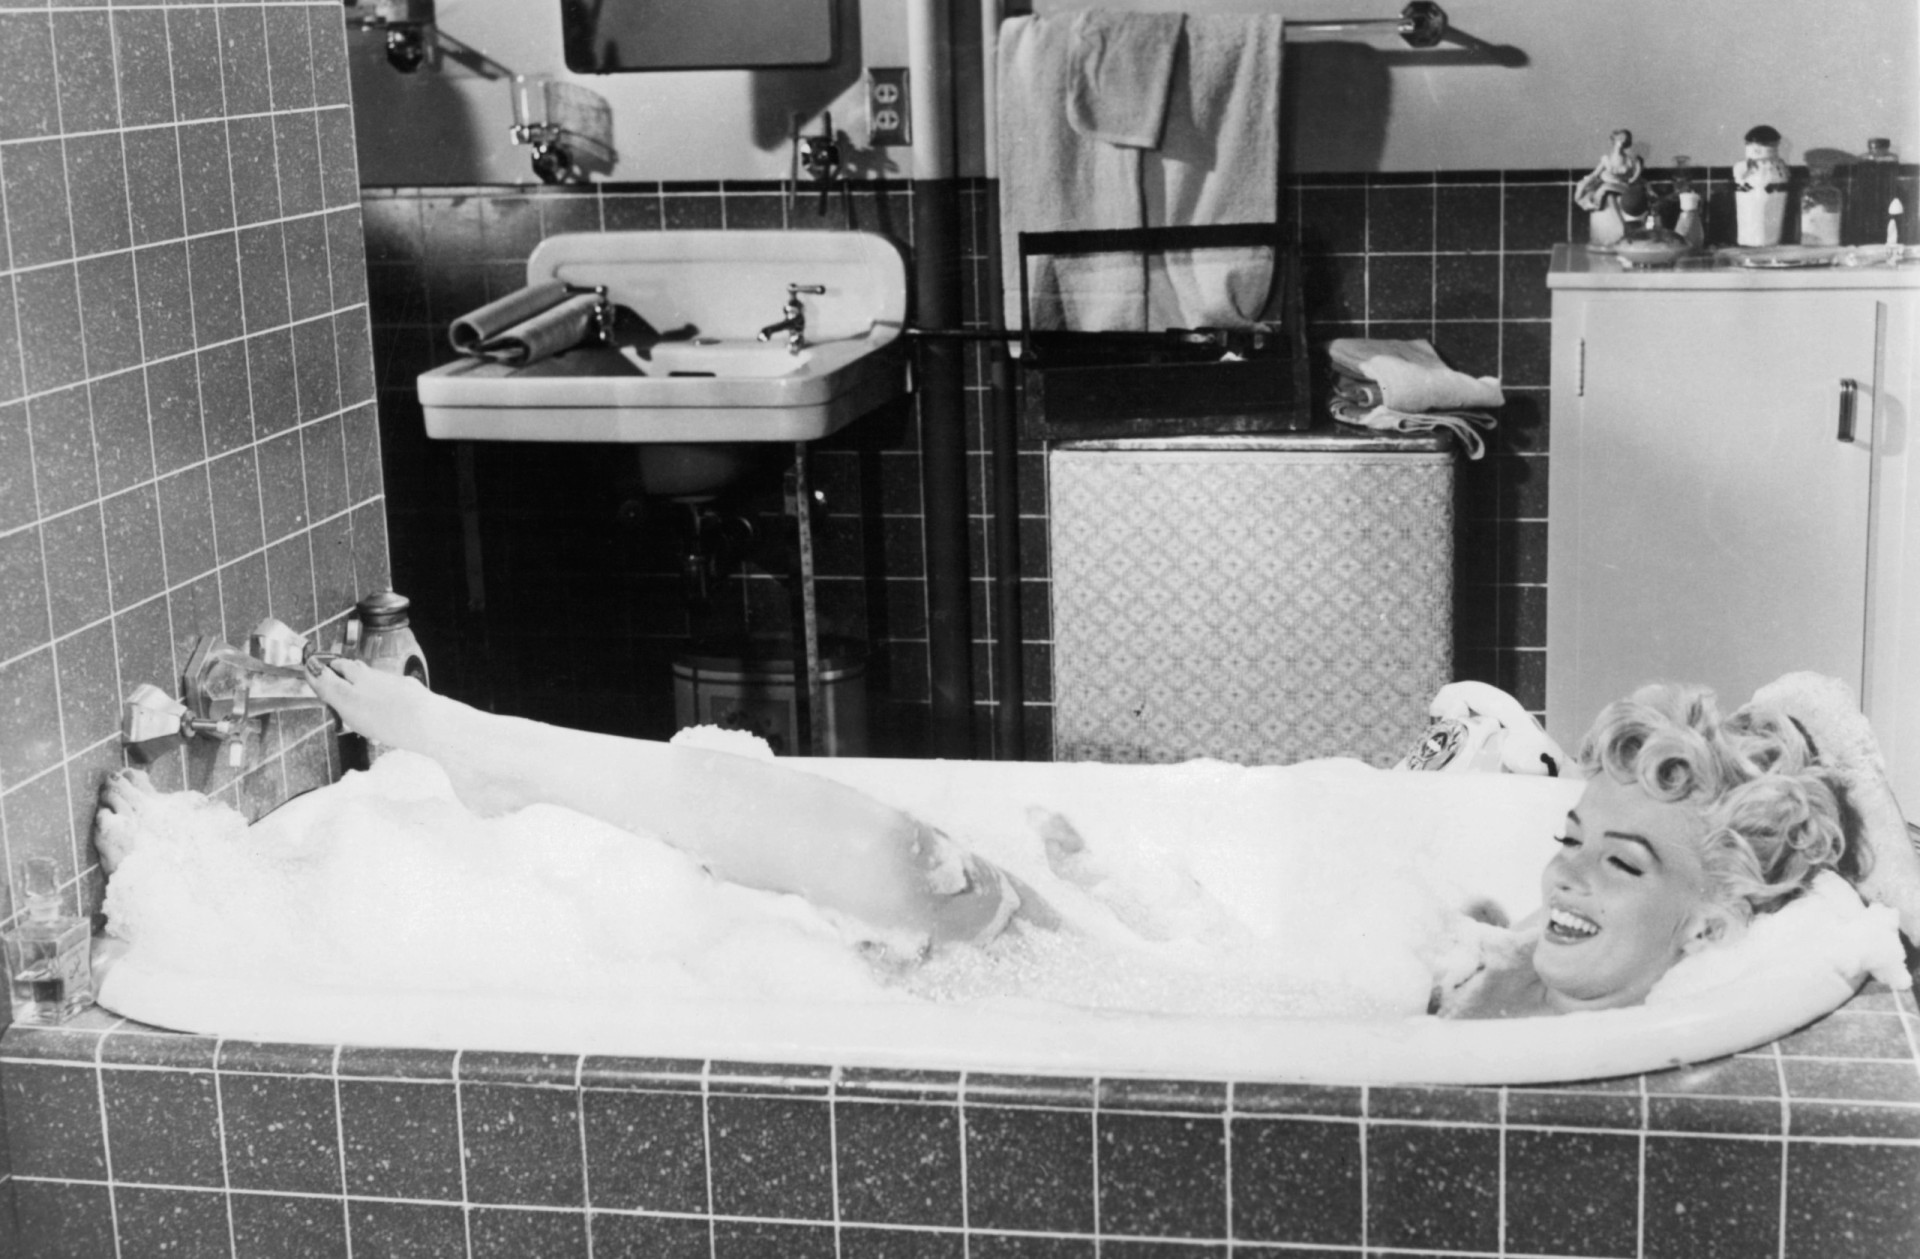 <p>While the iconic scene in which Marilyn Monroe's white dress is blown upwards by a passing metro train is the one everyone remembers in 'The Seven Year Itch,' there's also this risqué moment when "The Girl" soaps herself down in the bathtub.</p><p><a href="https://www.msn.com/en-us/community/channel/vid-7xx8mnucu55yw63we9va2gwr7uihbxwc68fxqp25x6tg4ftibpra?cvid=94631541bc0f4f89bfd59158d696ad7e">Follow us and access great exclusive content every day</a></p>